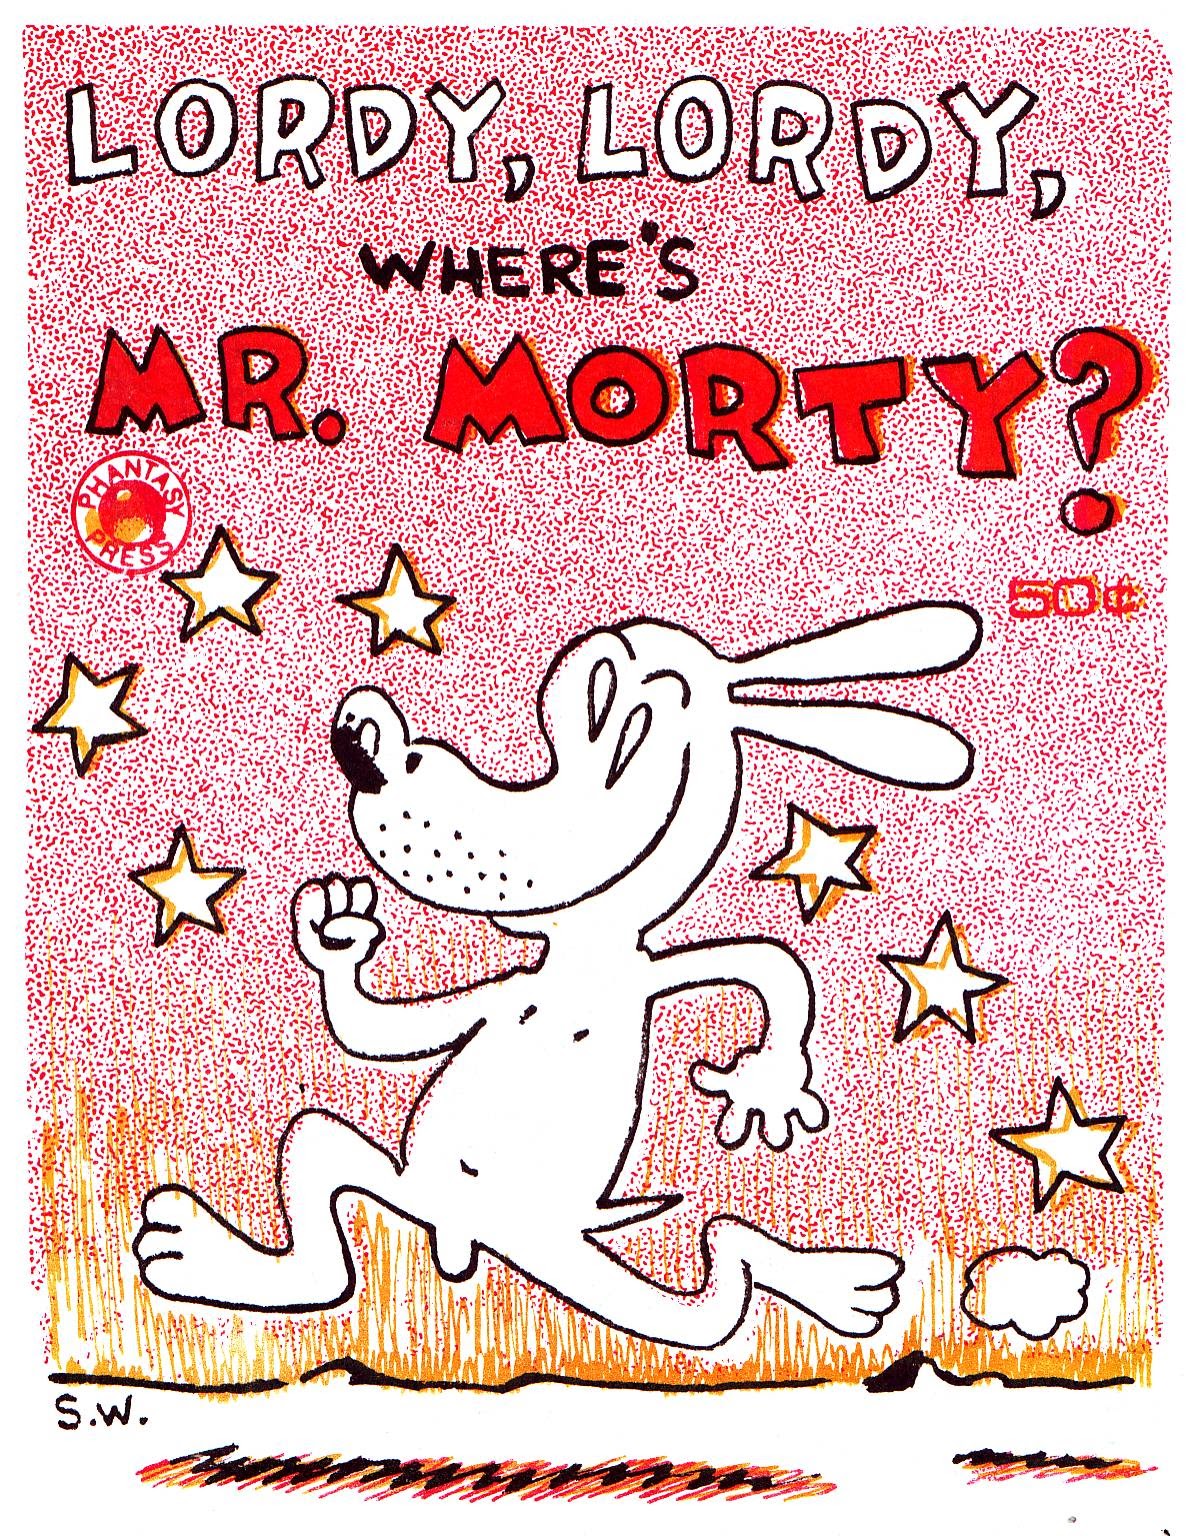 Read online Lordy, Lordy, Where's Mr. Morty? comic -  Issue # Full - 1